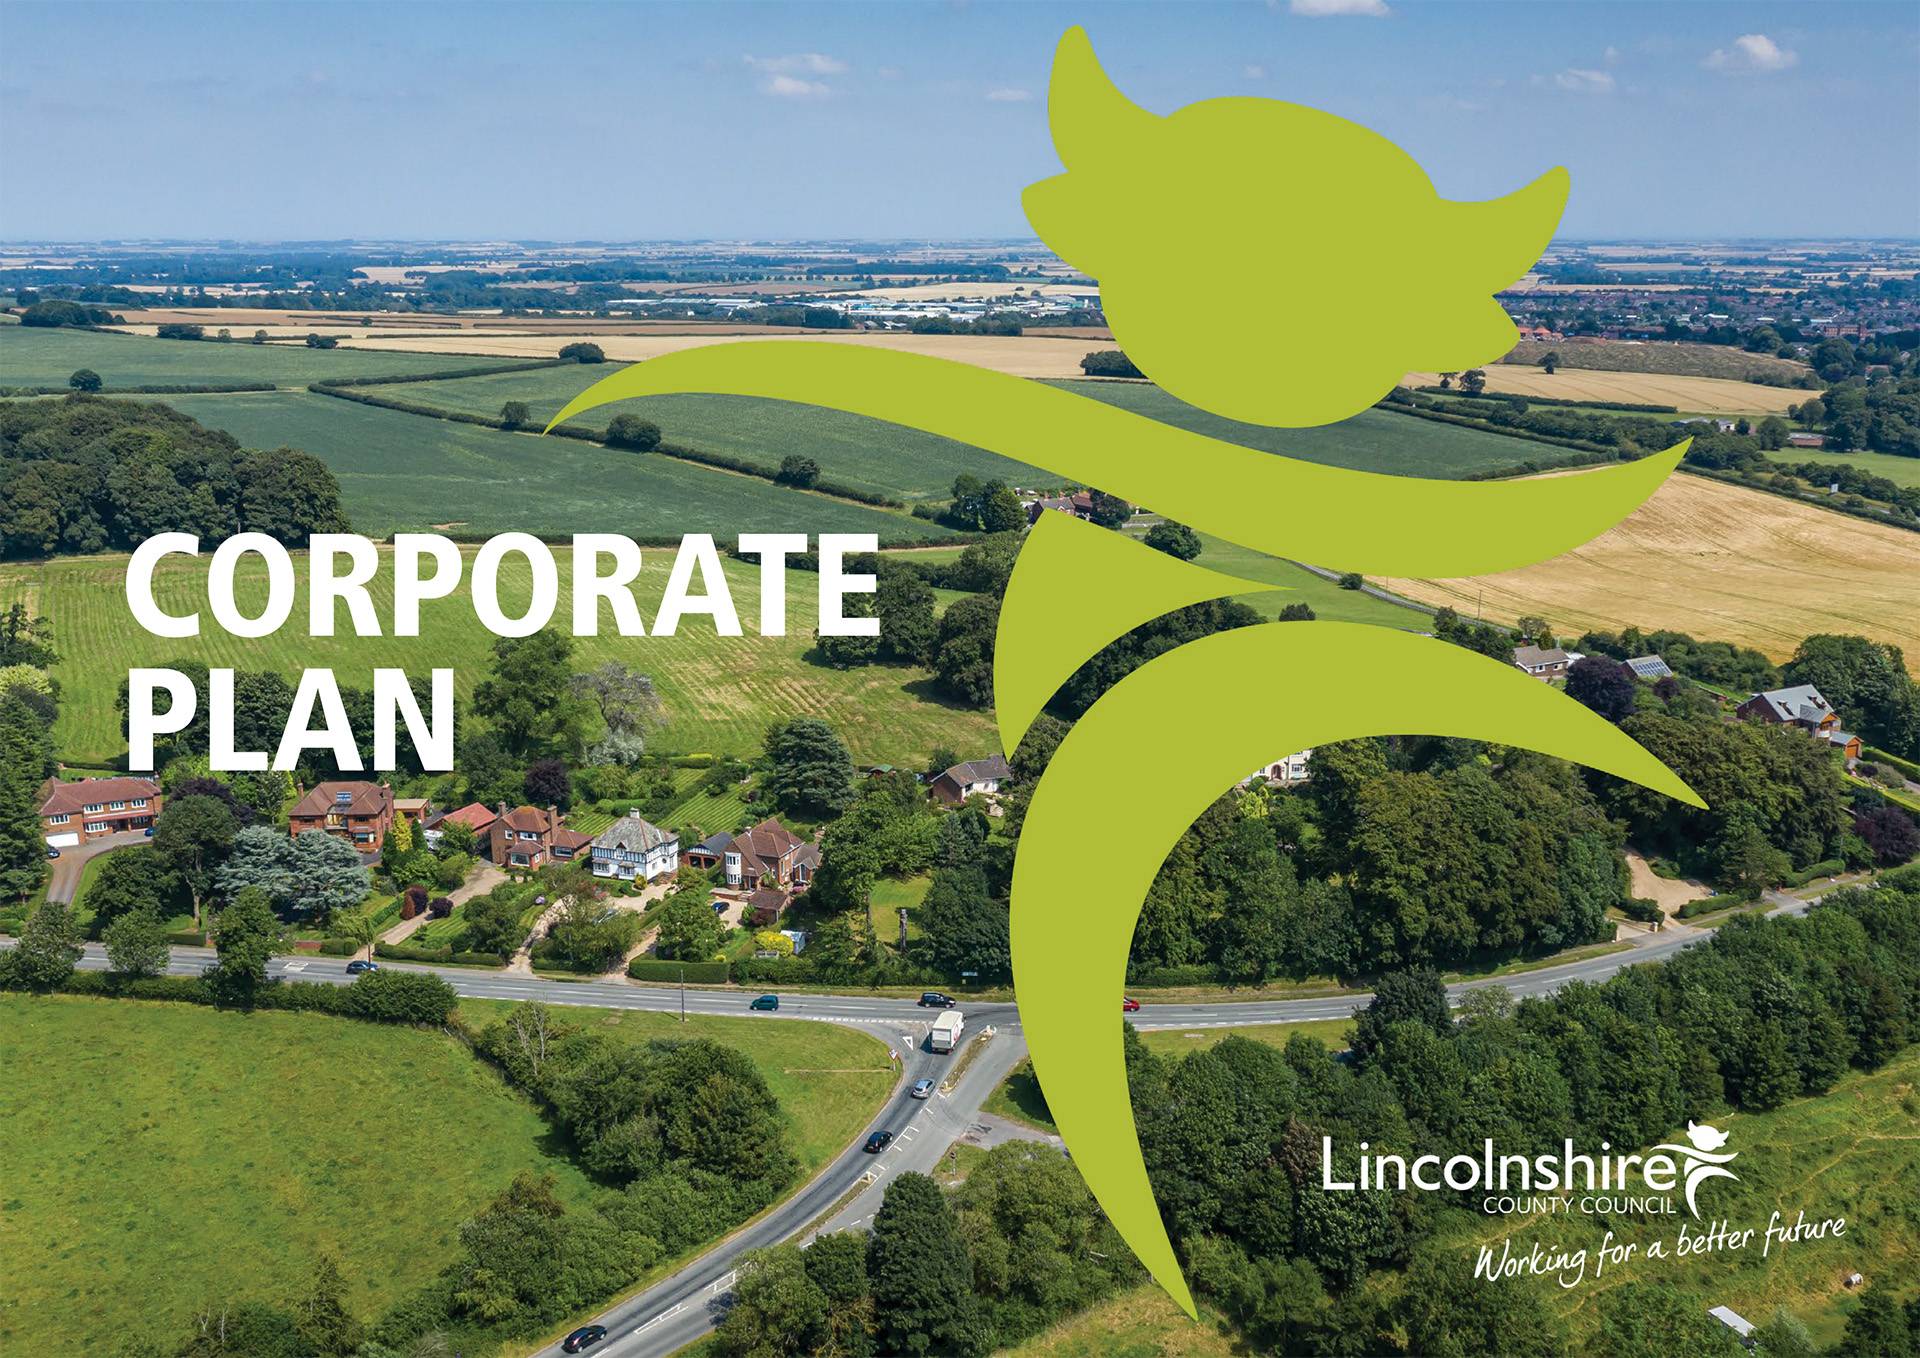 Corporate Plan Cover showing the council logo and a view of the Lincolnshire countryside